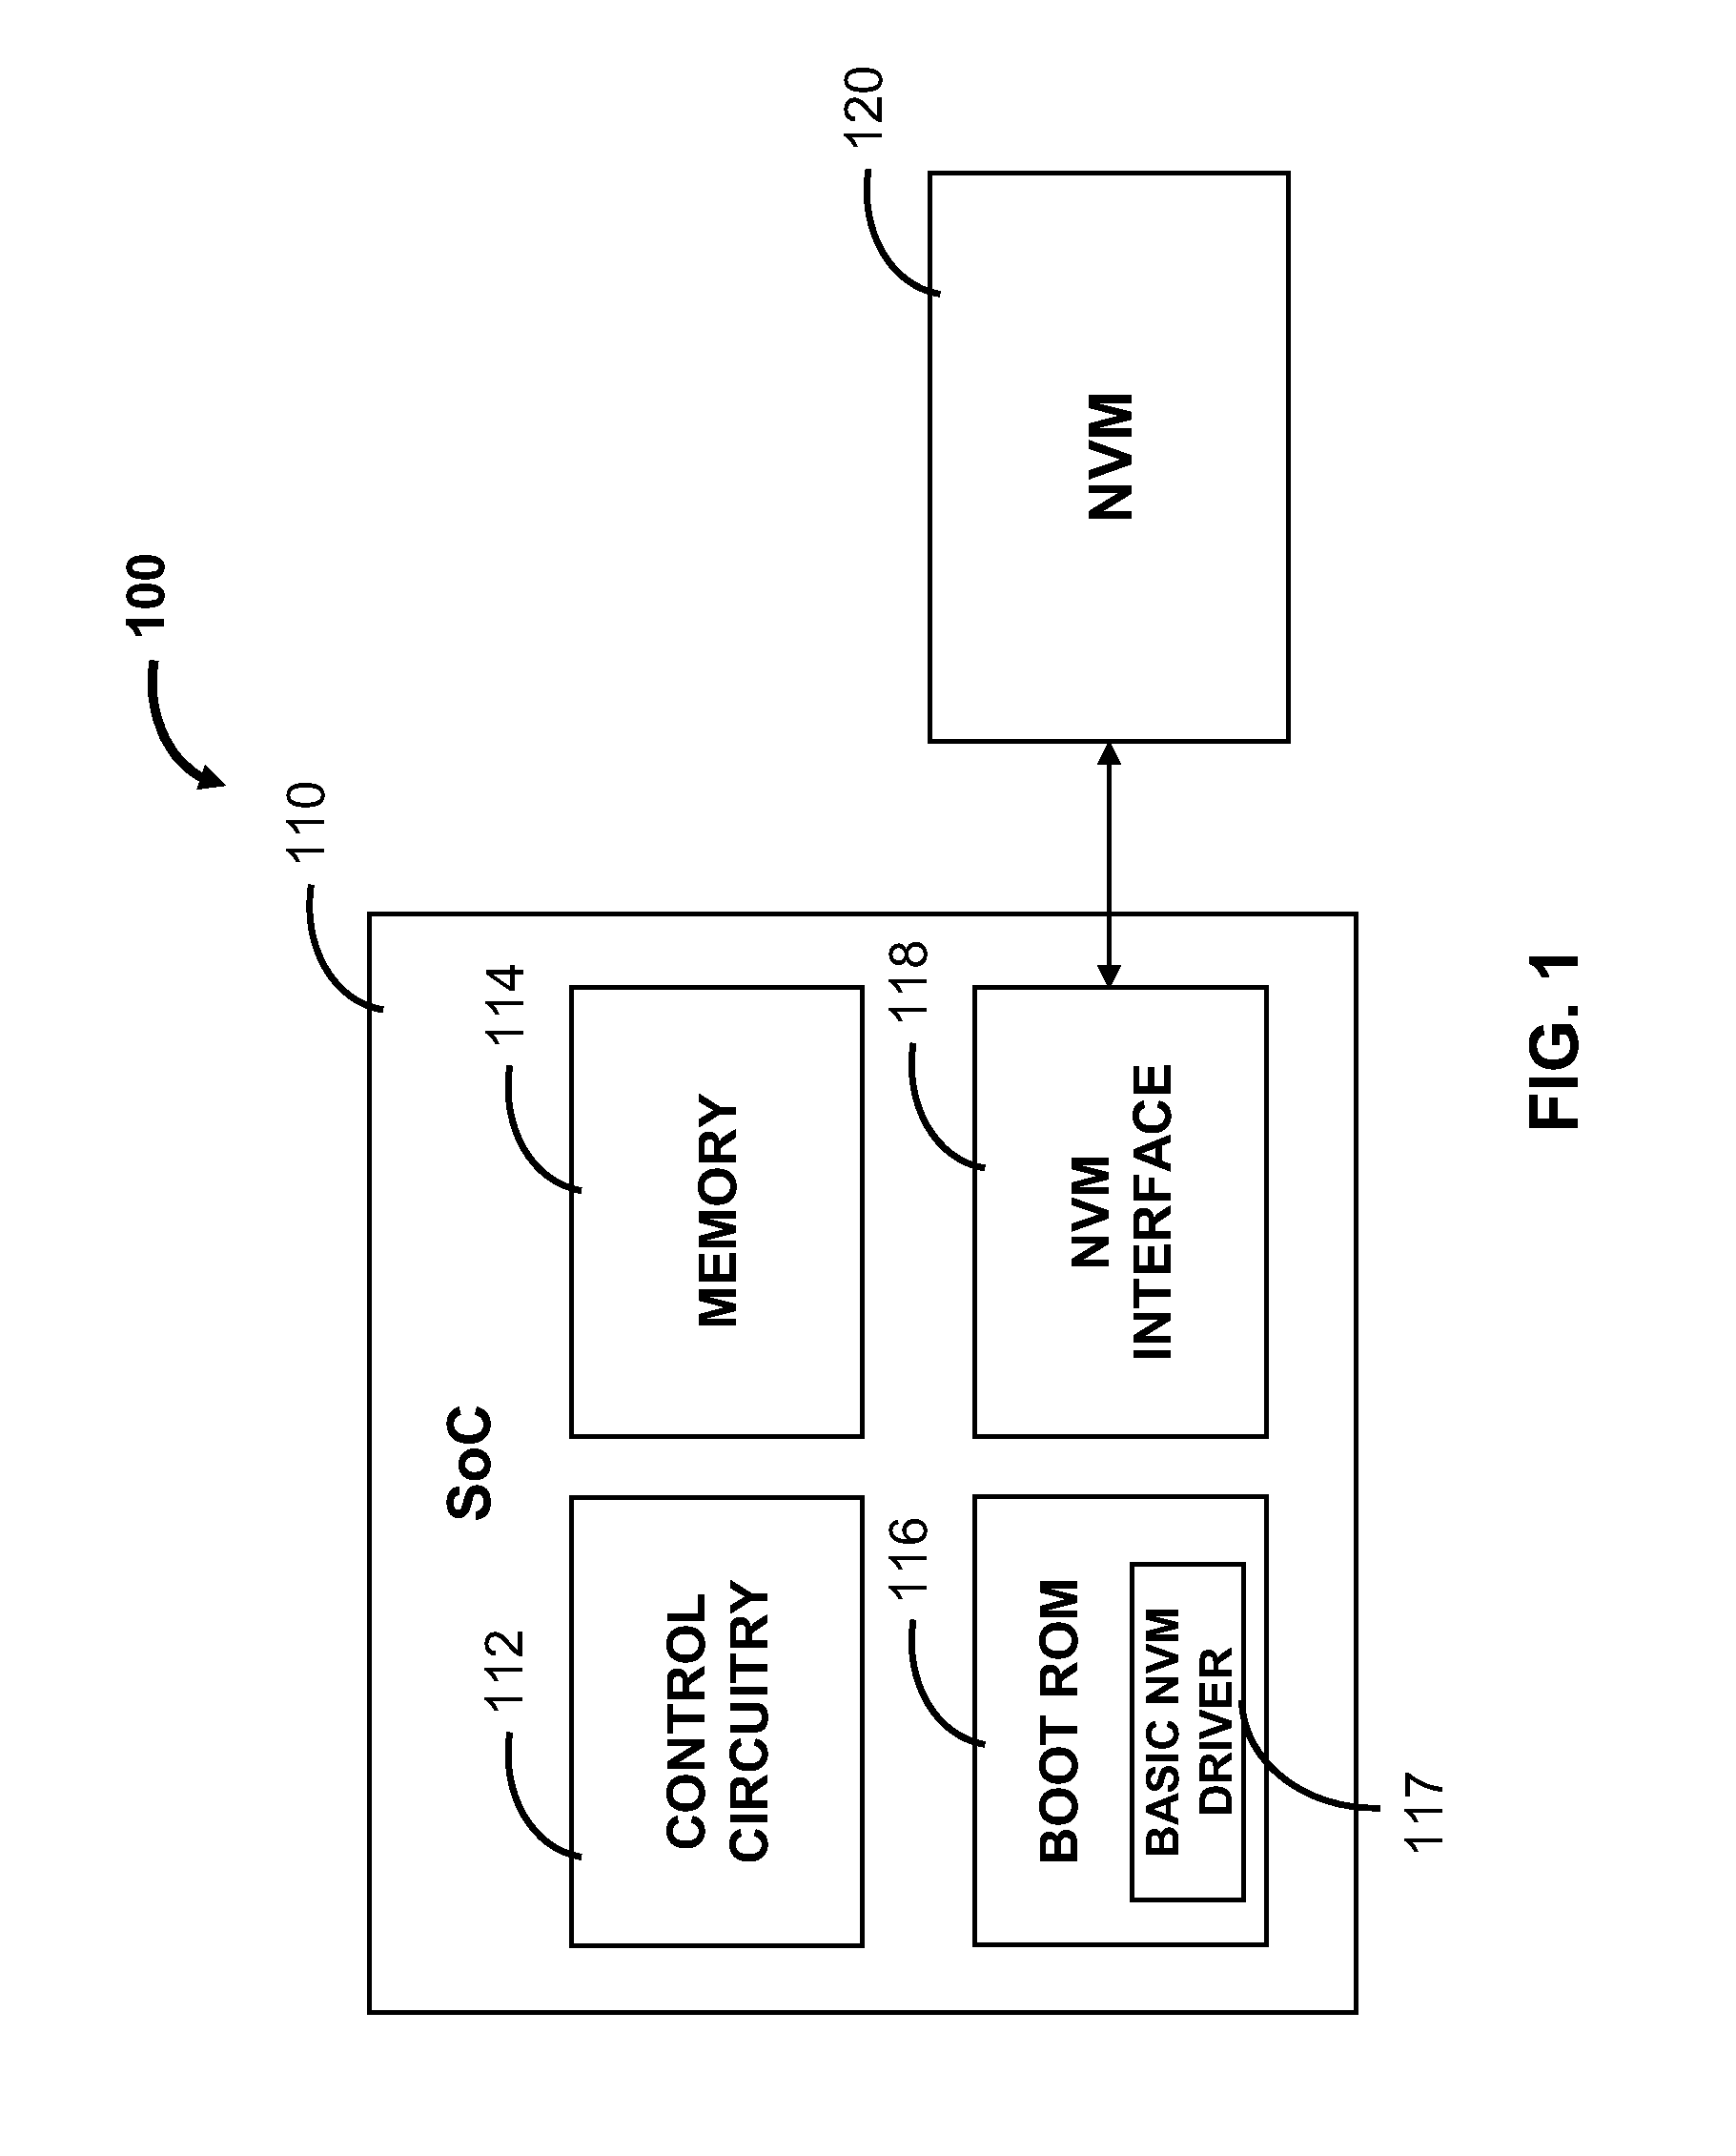 Boot data storage schemes for electronic devices